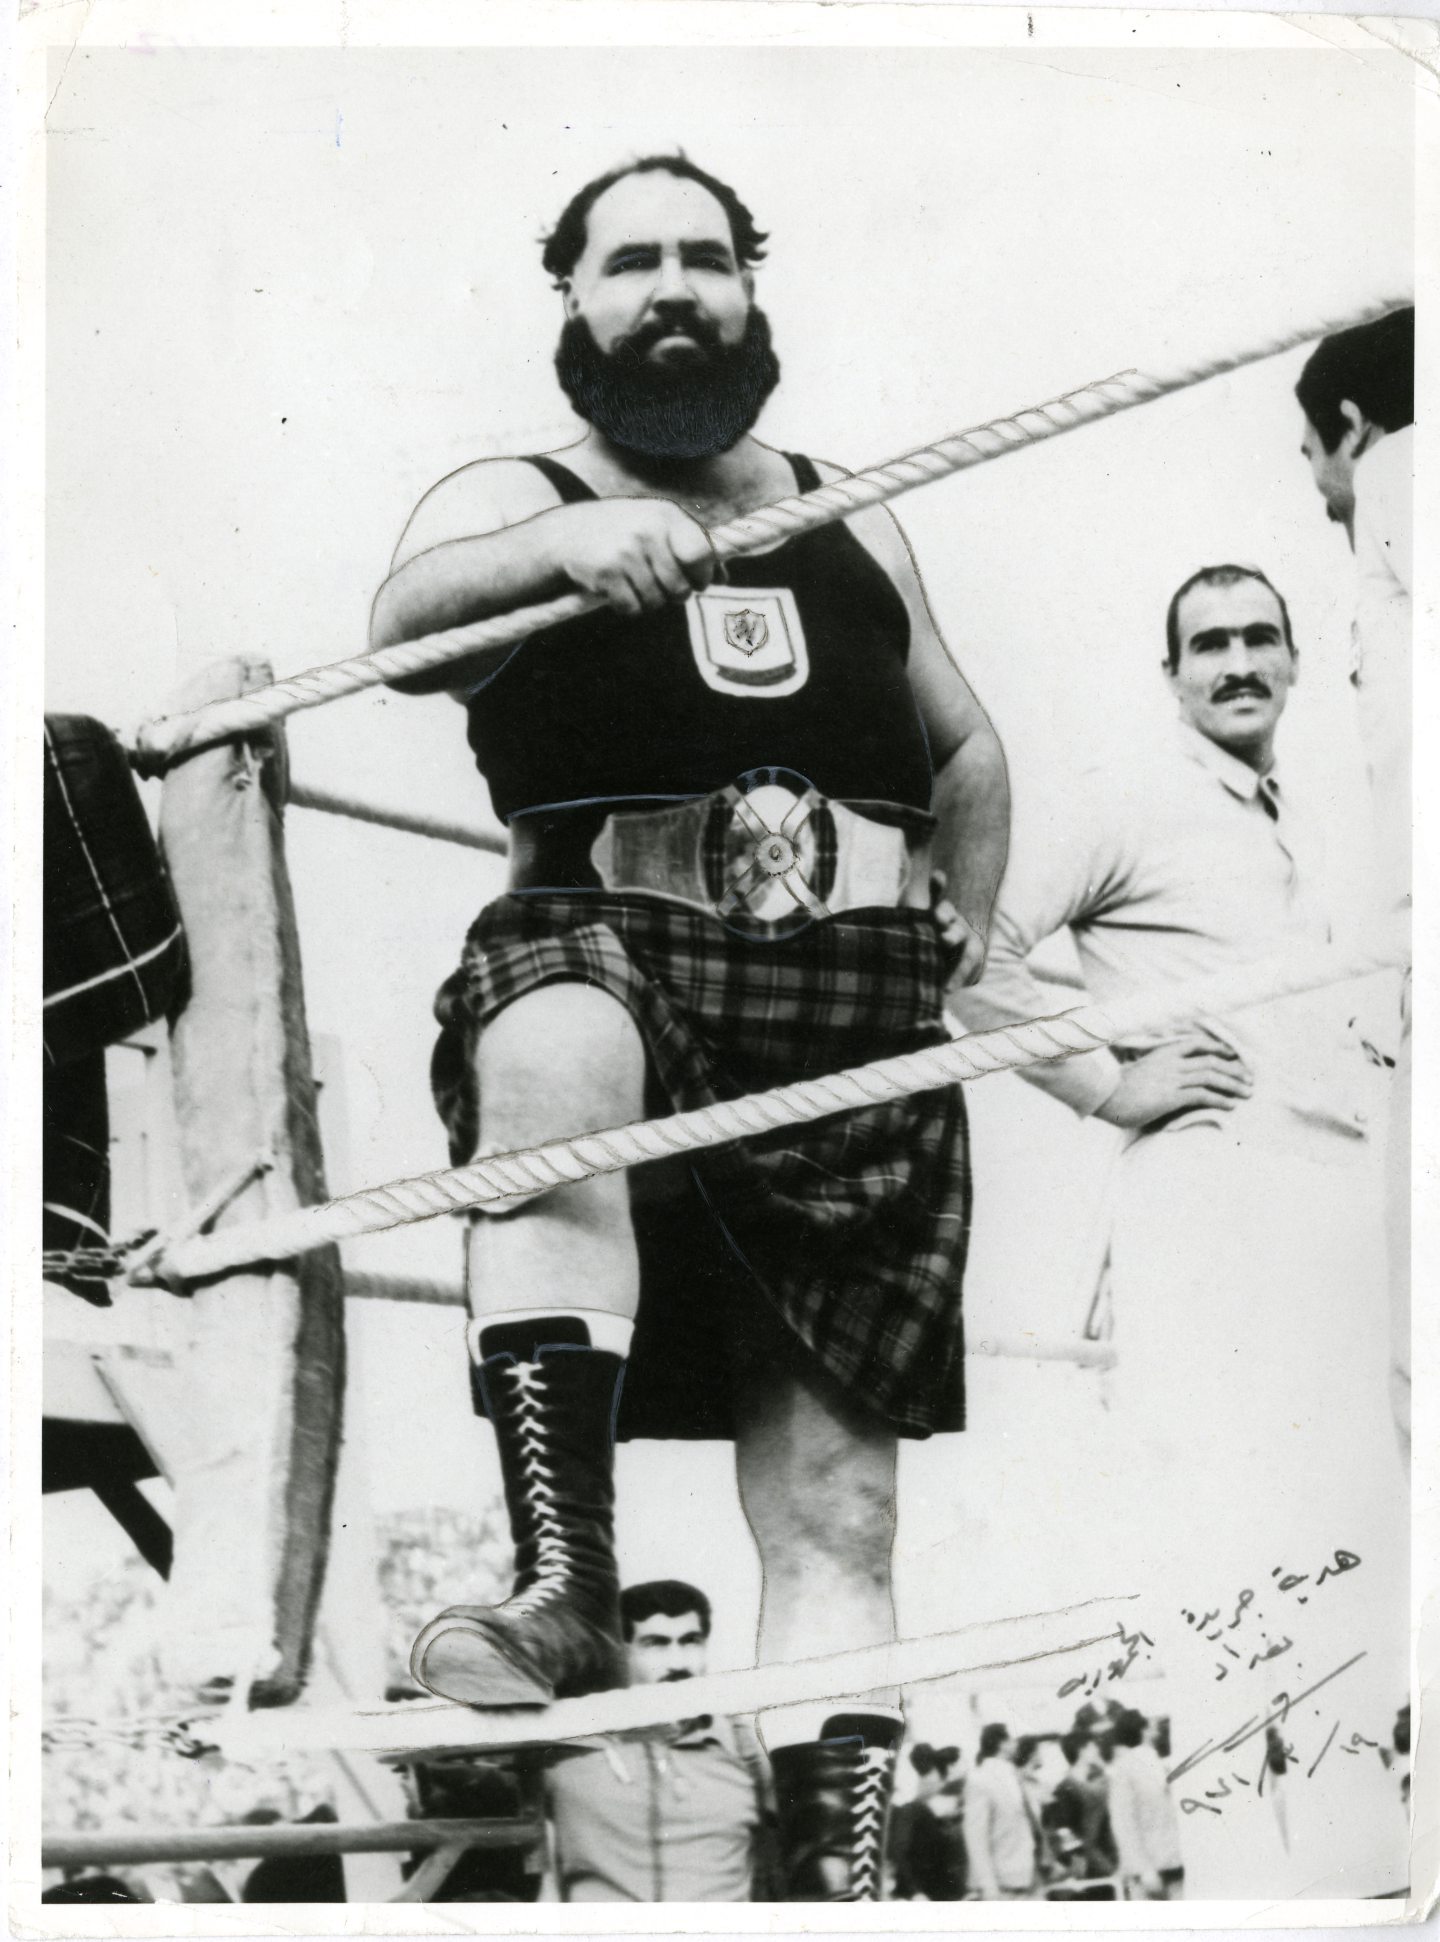 Ian Campbell, pictured in the ring in a kilt, performed in the squared circle across the world.